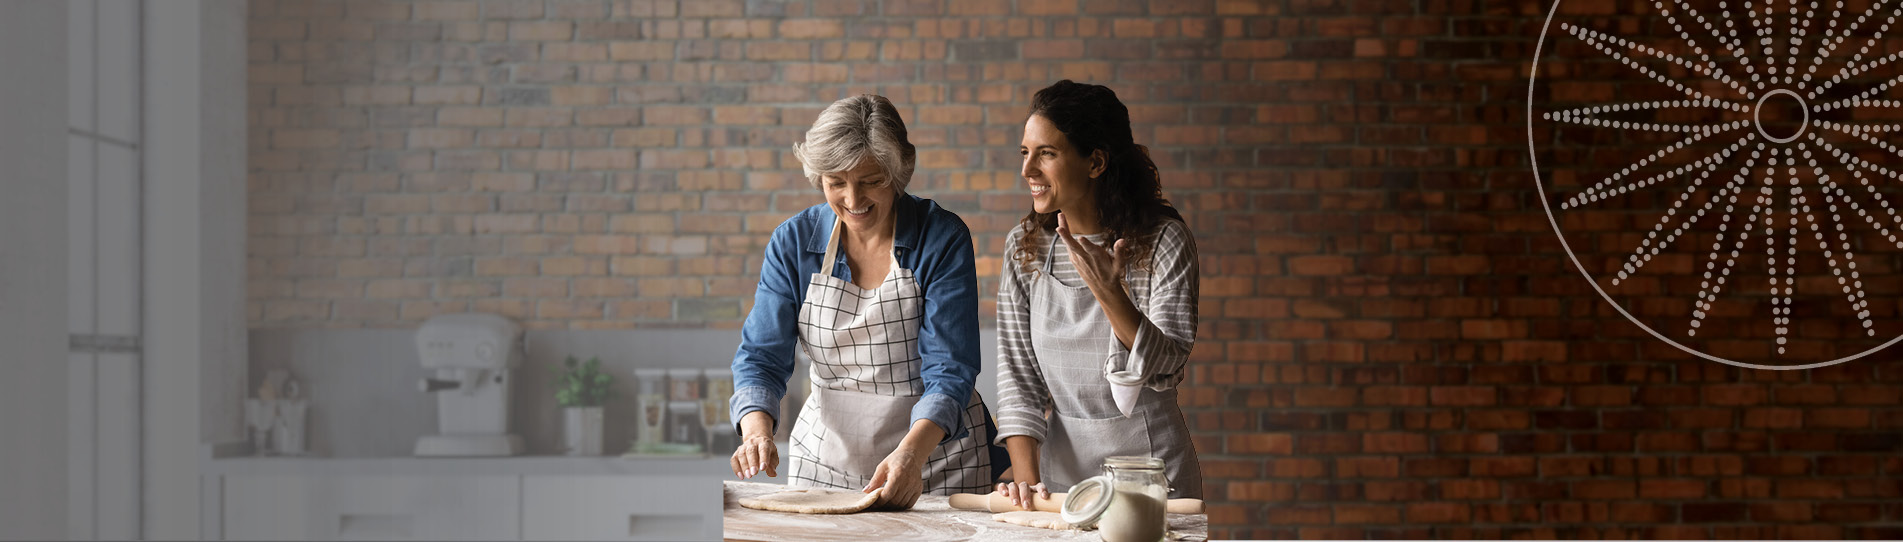 adult woman baking with her older mom